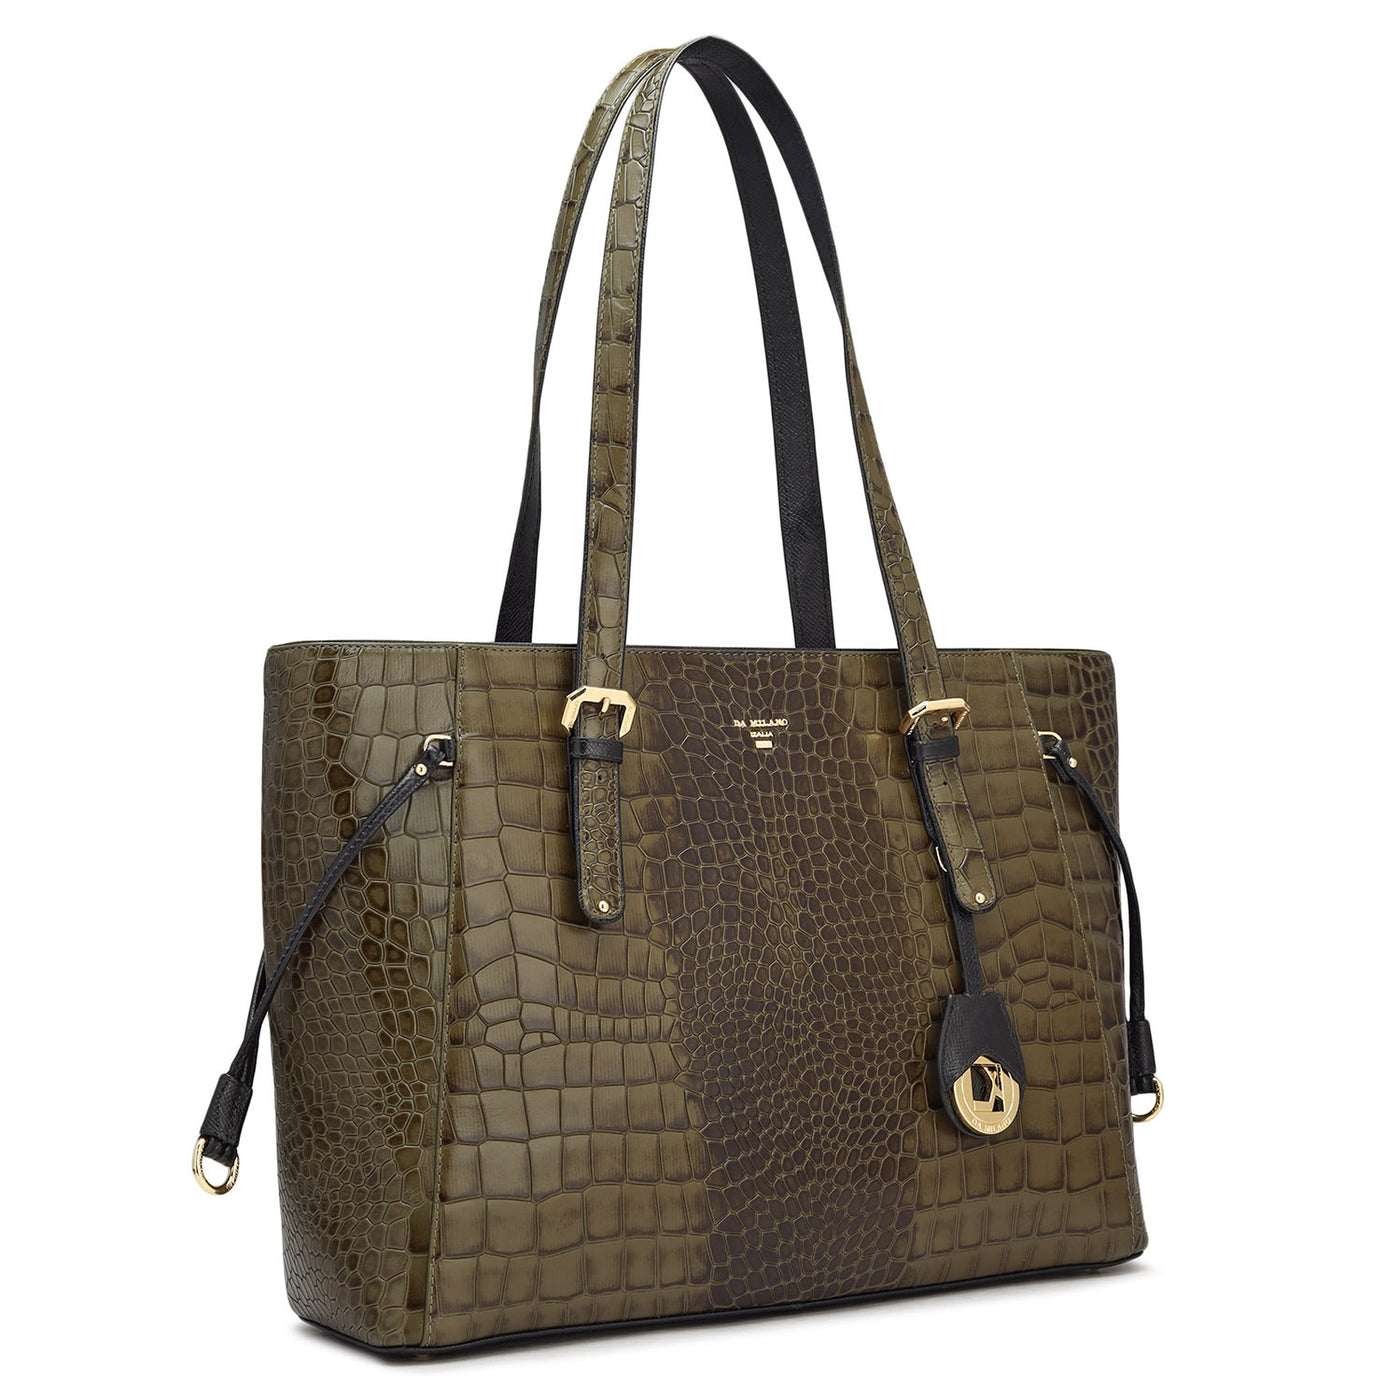 Large Croco Leather Tote - Military Green